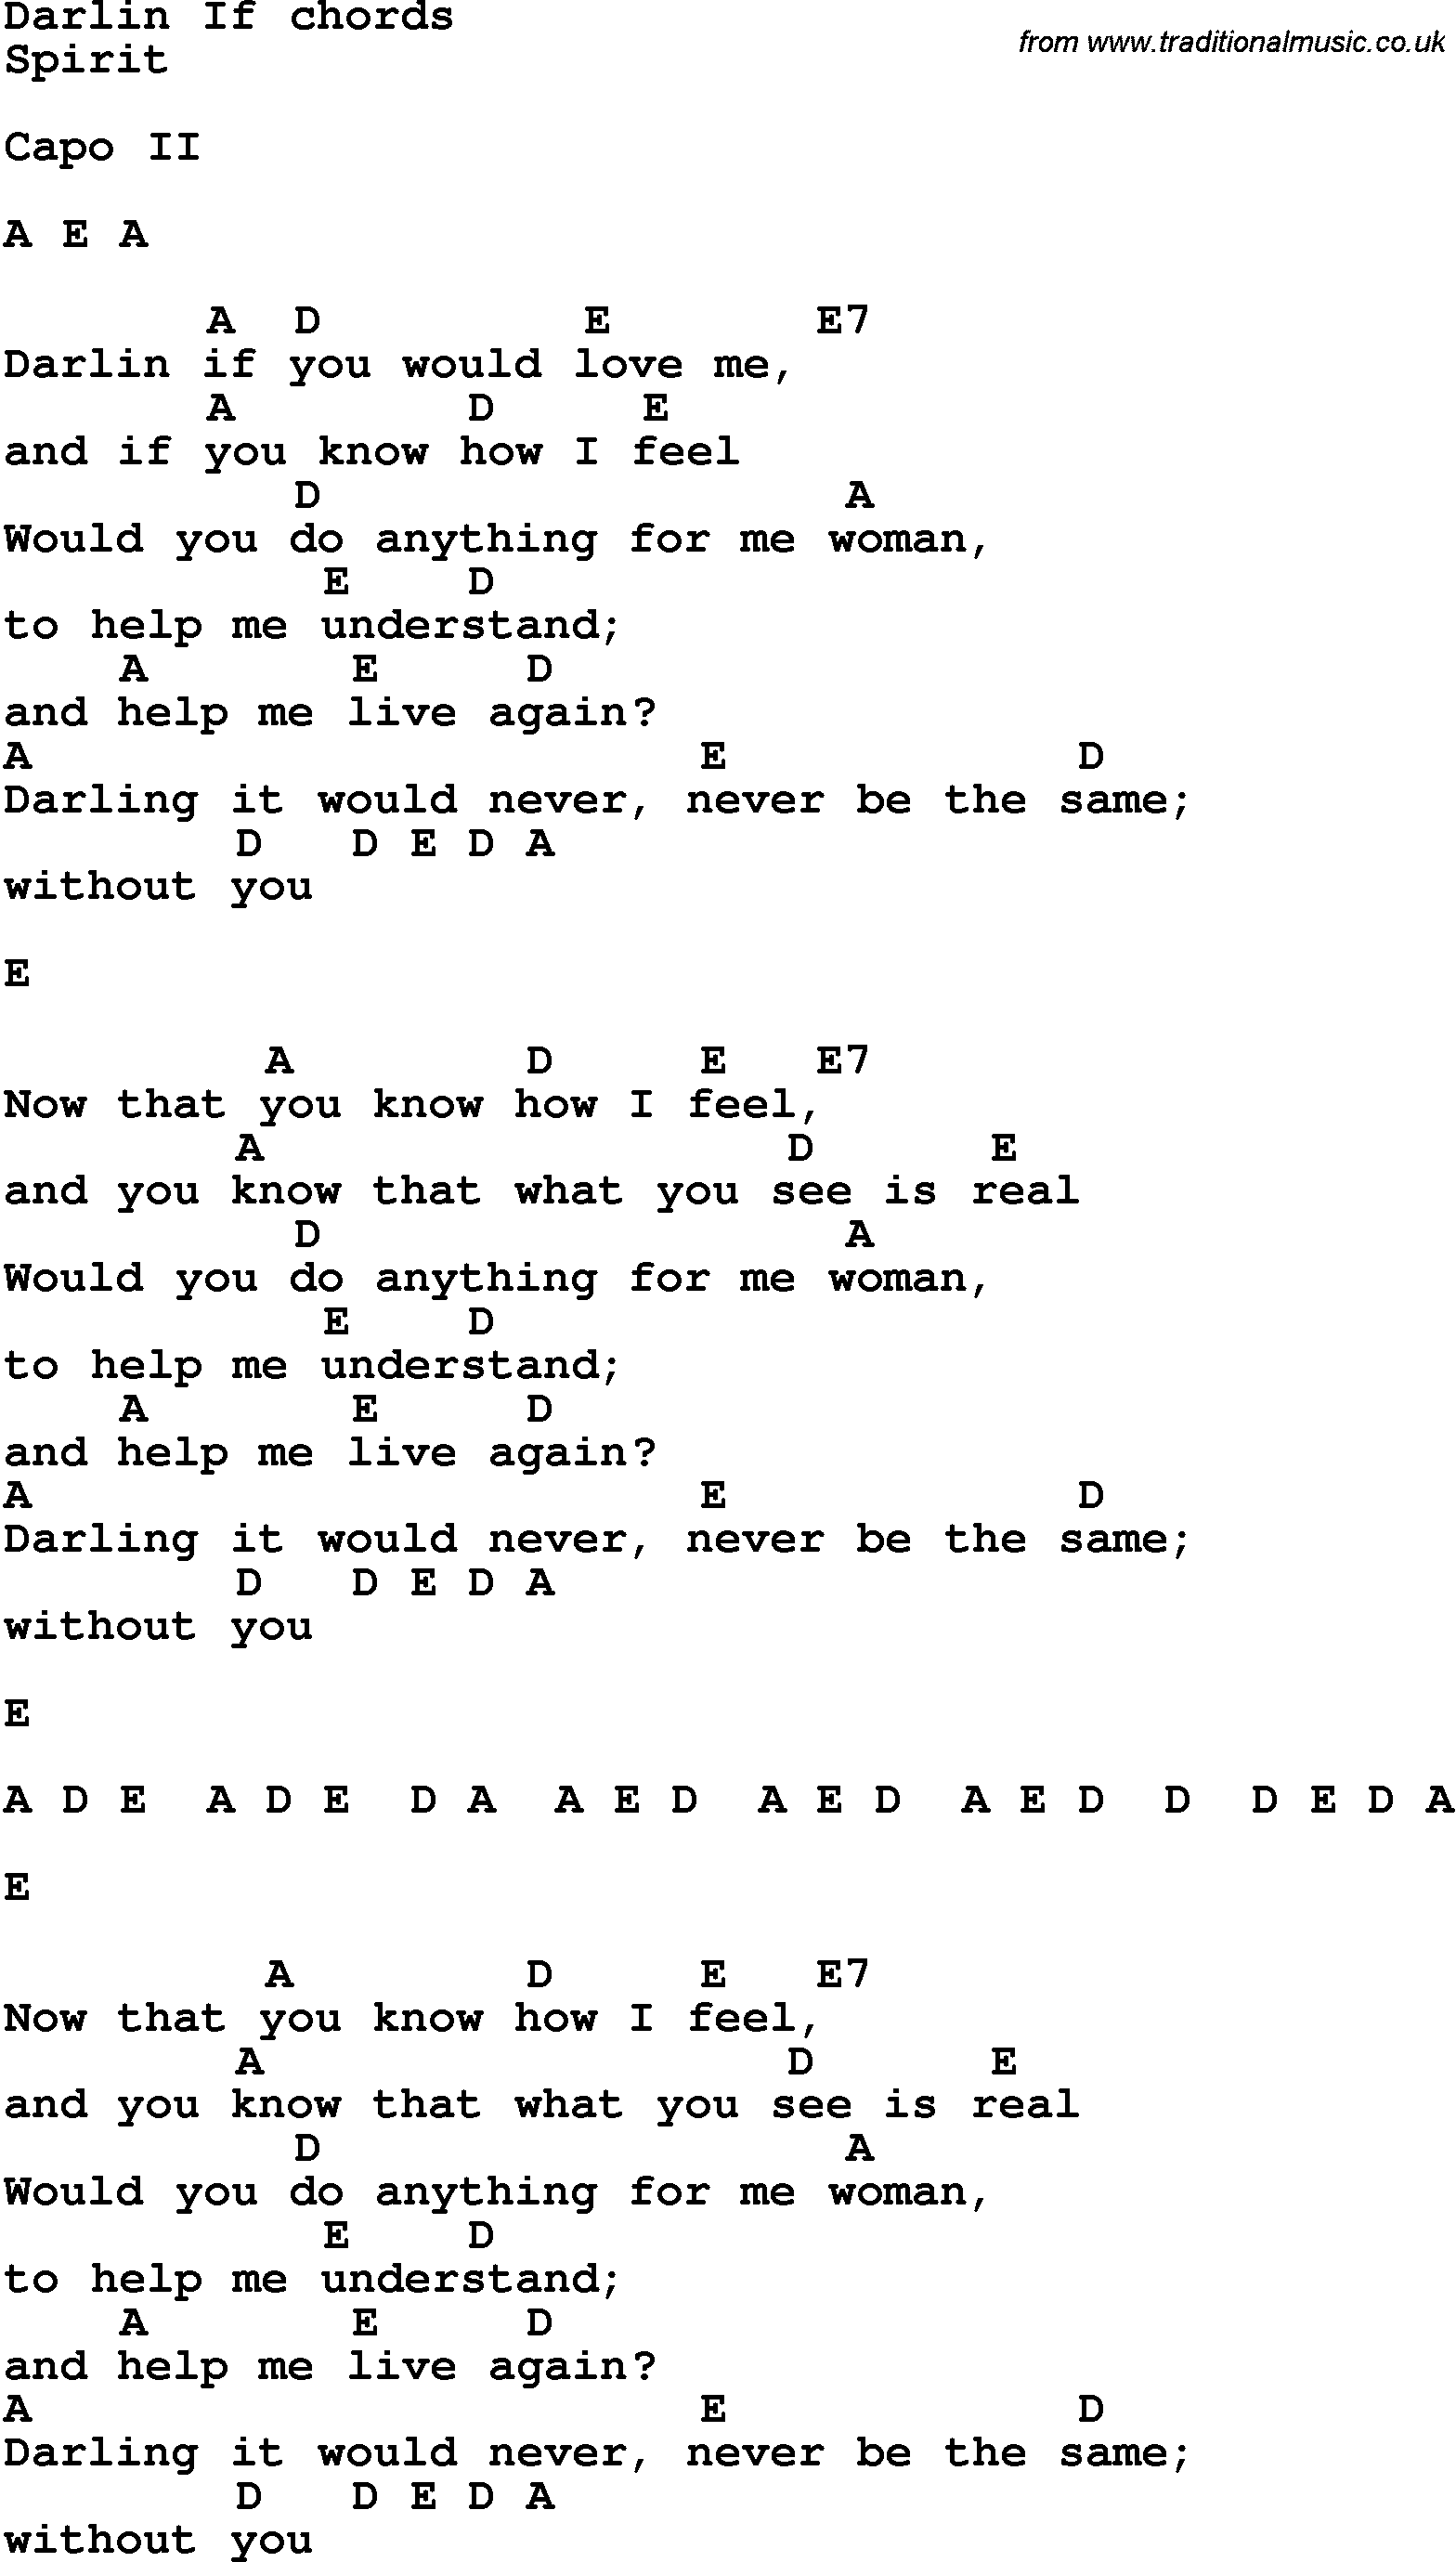 Song Lyrics with guitar chords for Darling If